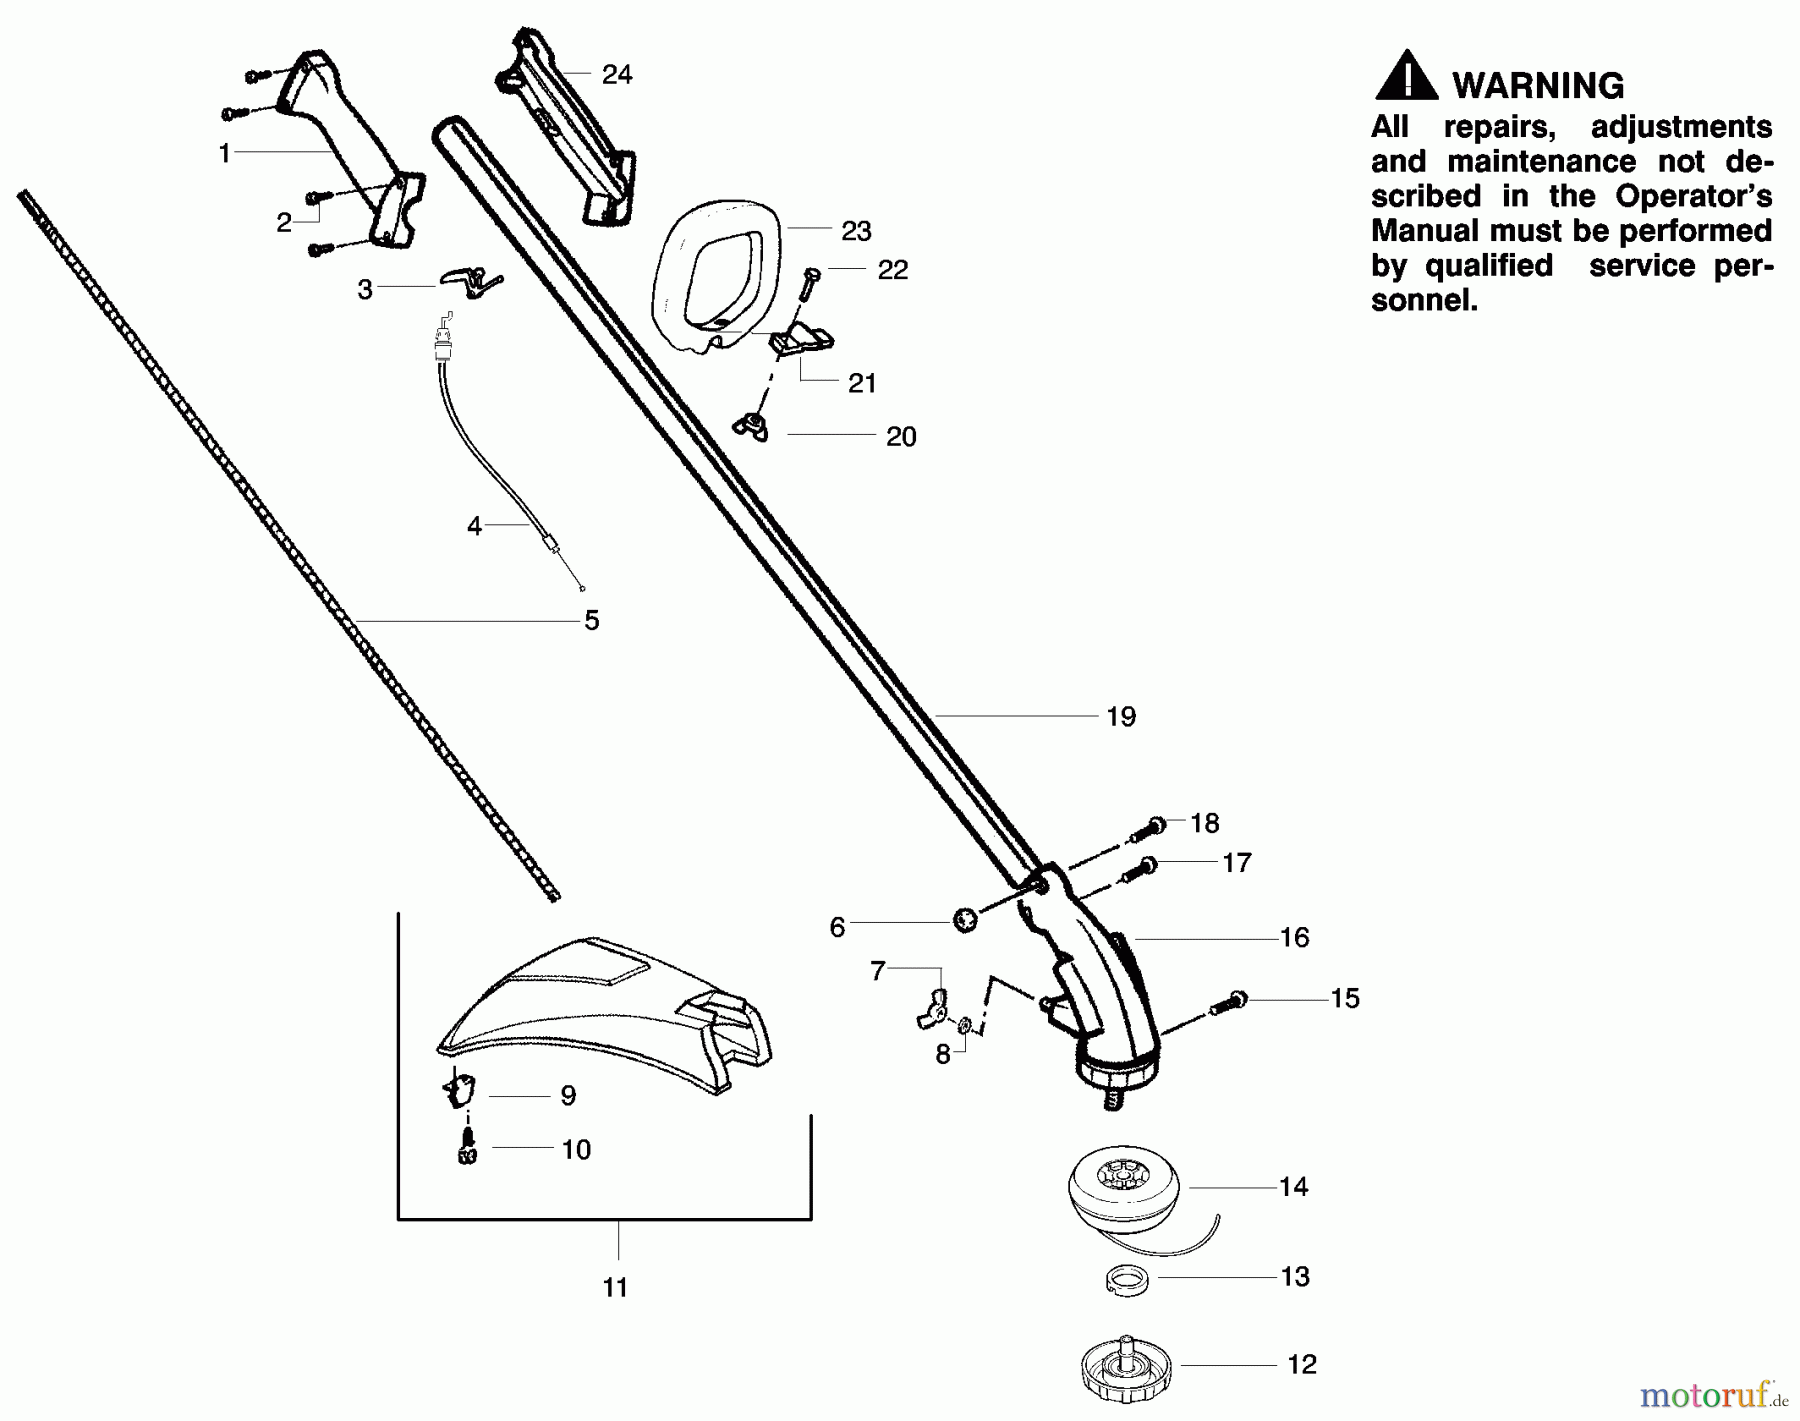  Poulan / Weed Eater Motorsensen, Trimmer PL25 (Type 4) - Poulan String Trimmer Handle, Chassis & Bar Assembly